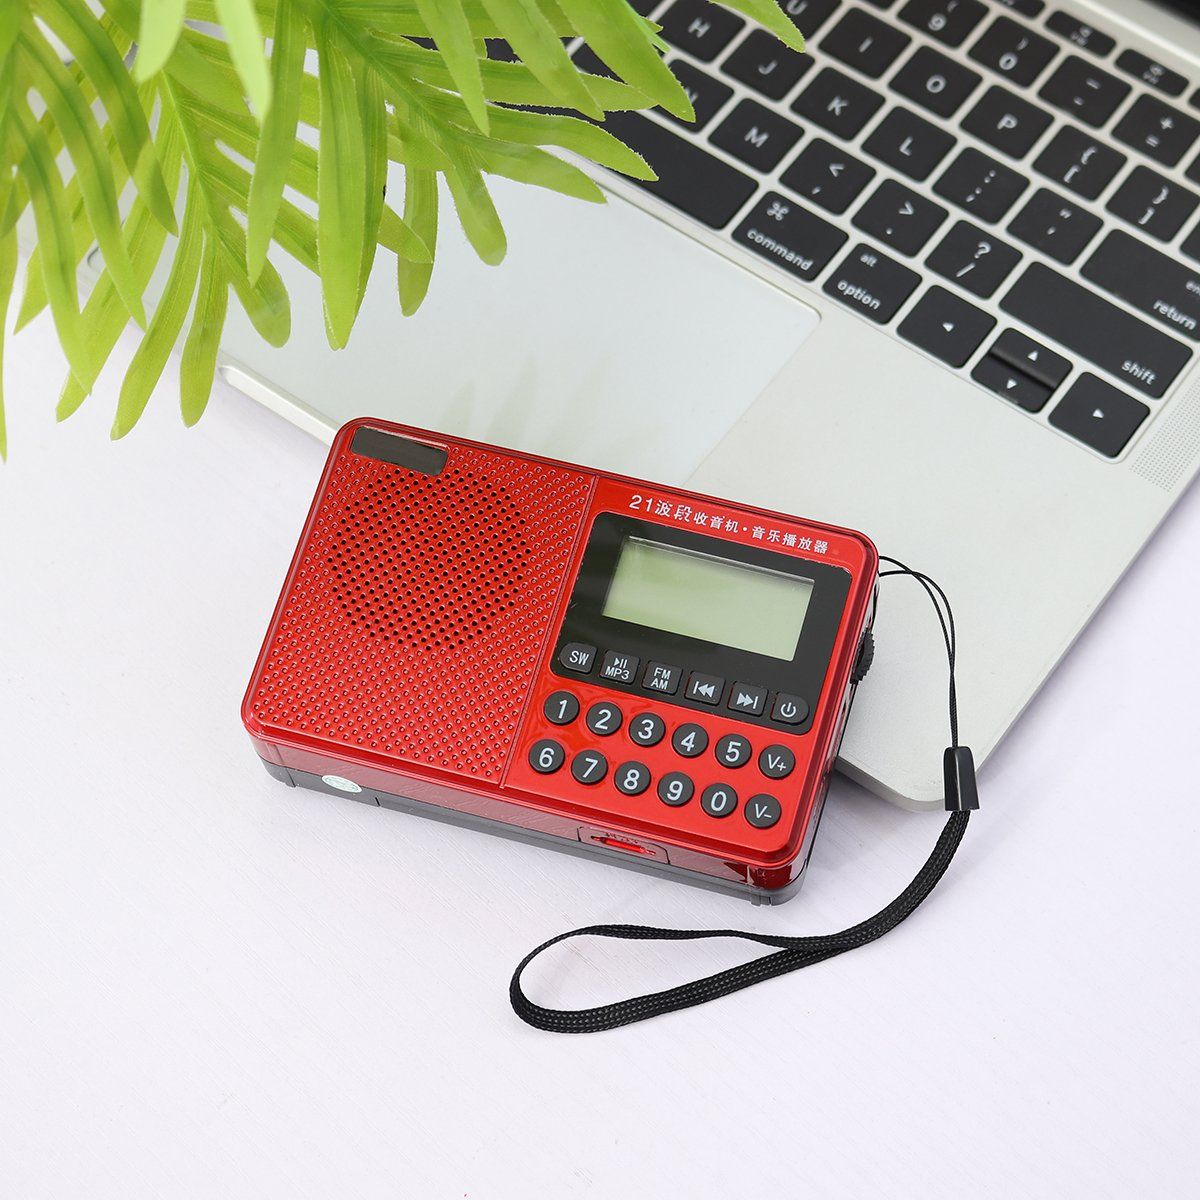 Portable-FM-AM-SW-21-Bands-DSP-Digital-Radio-USB-TF-Card-MP3-Music-Player-Speaker-With-Telescopic-An-1688399